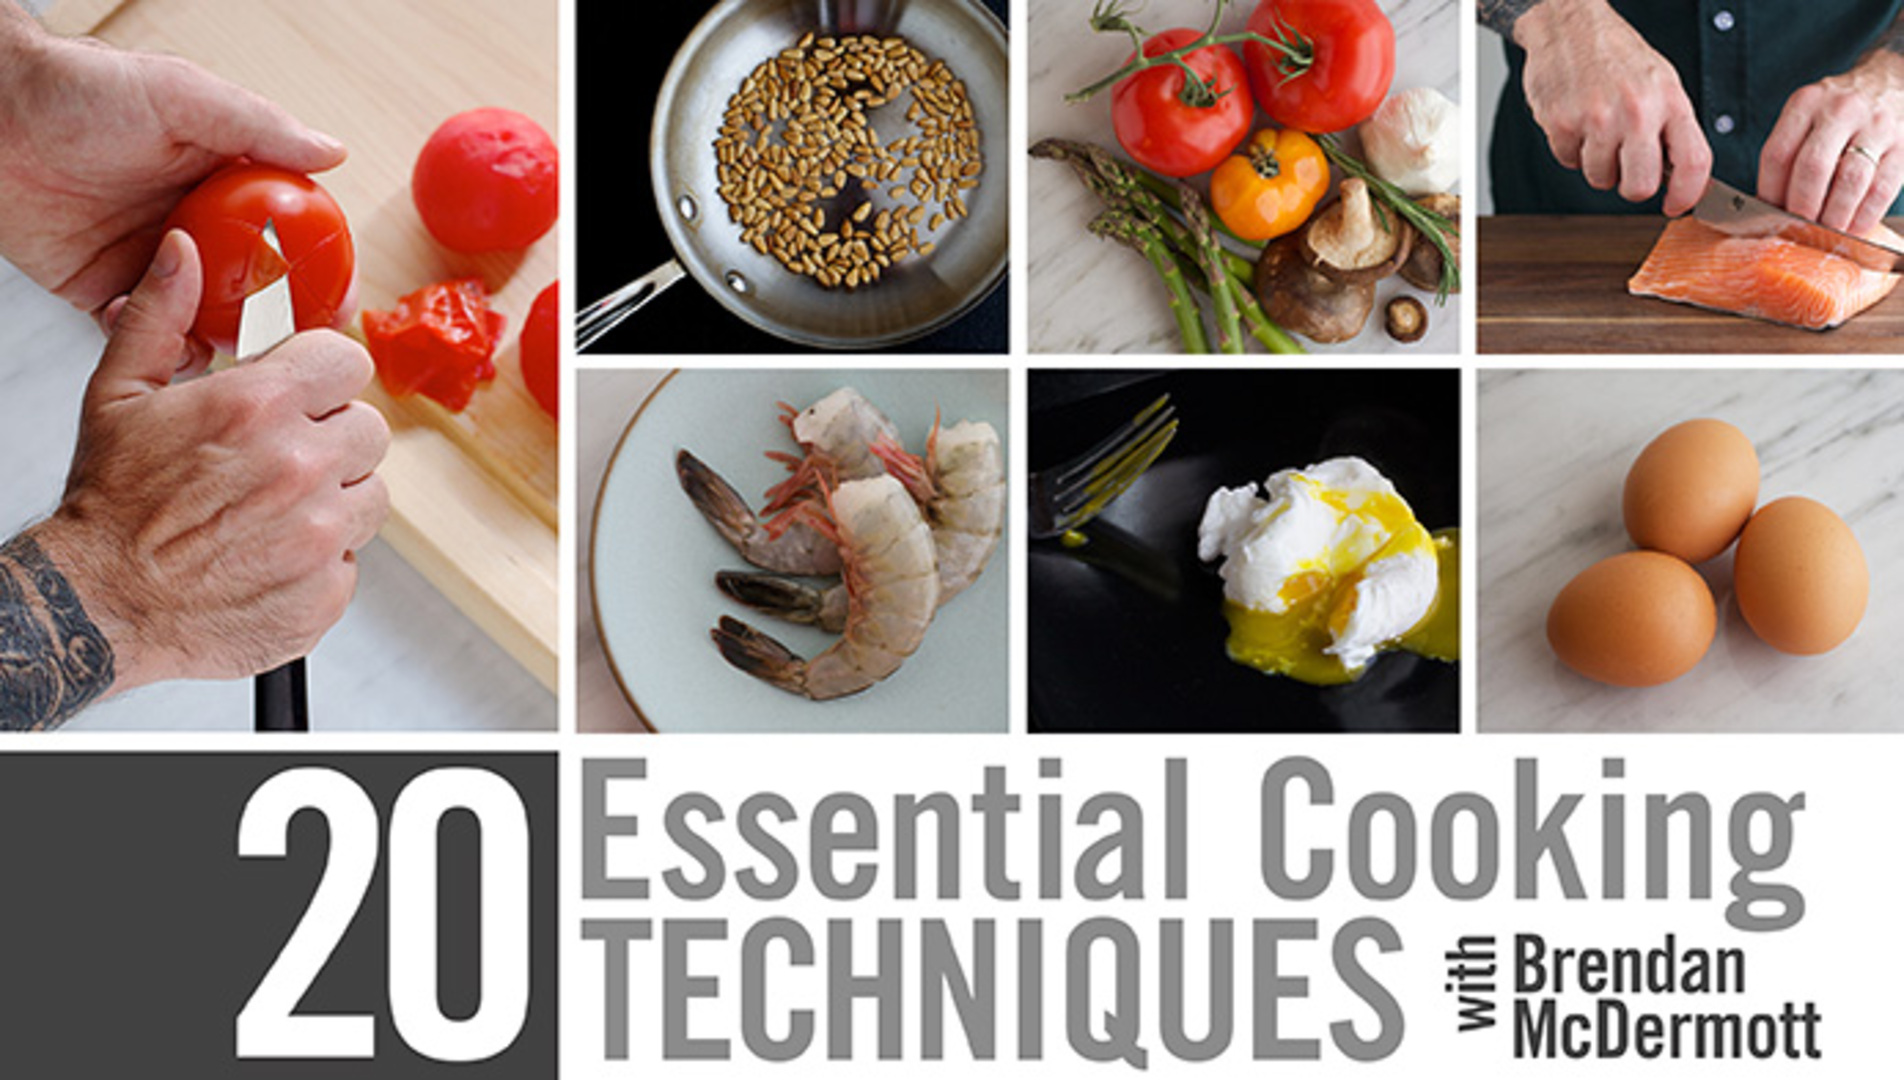 A Lesson in Adaptive Cooking Tools – Look, Cook, and Eat